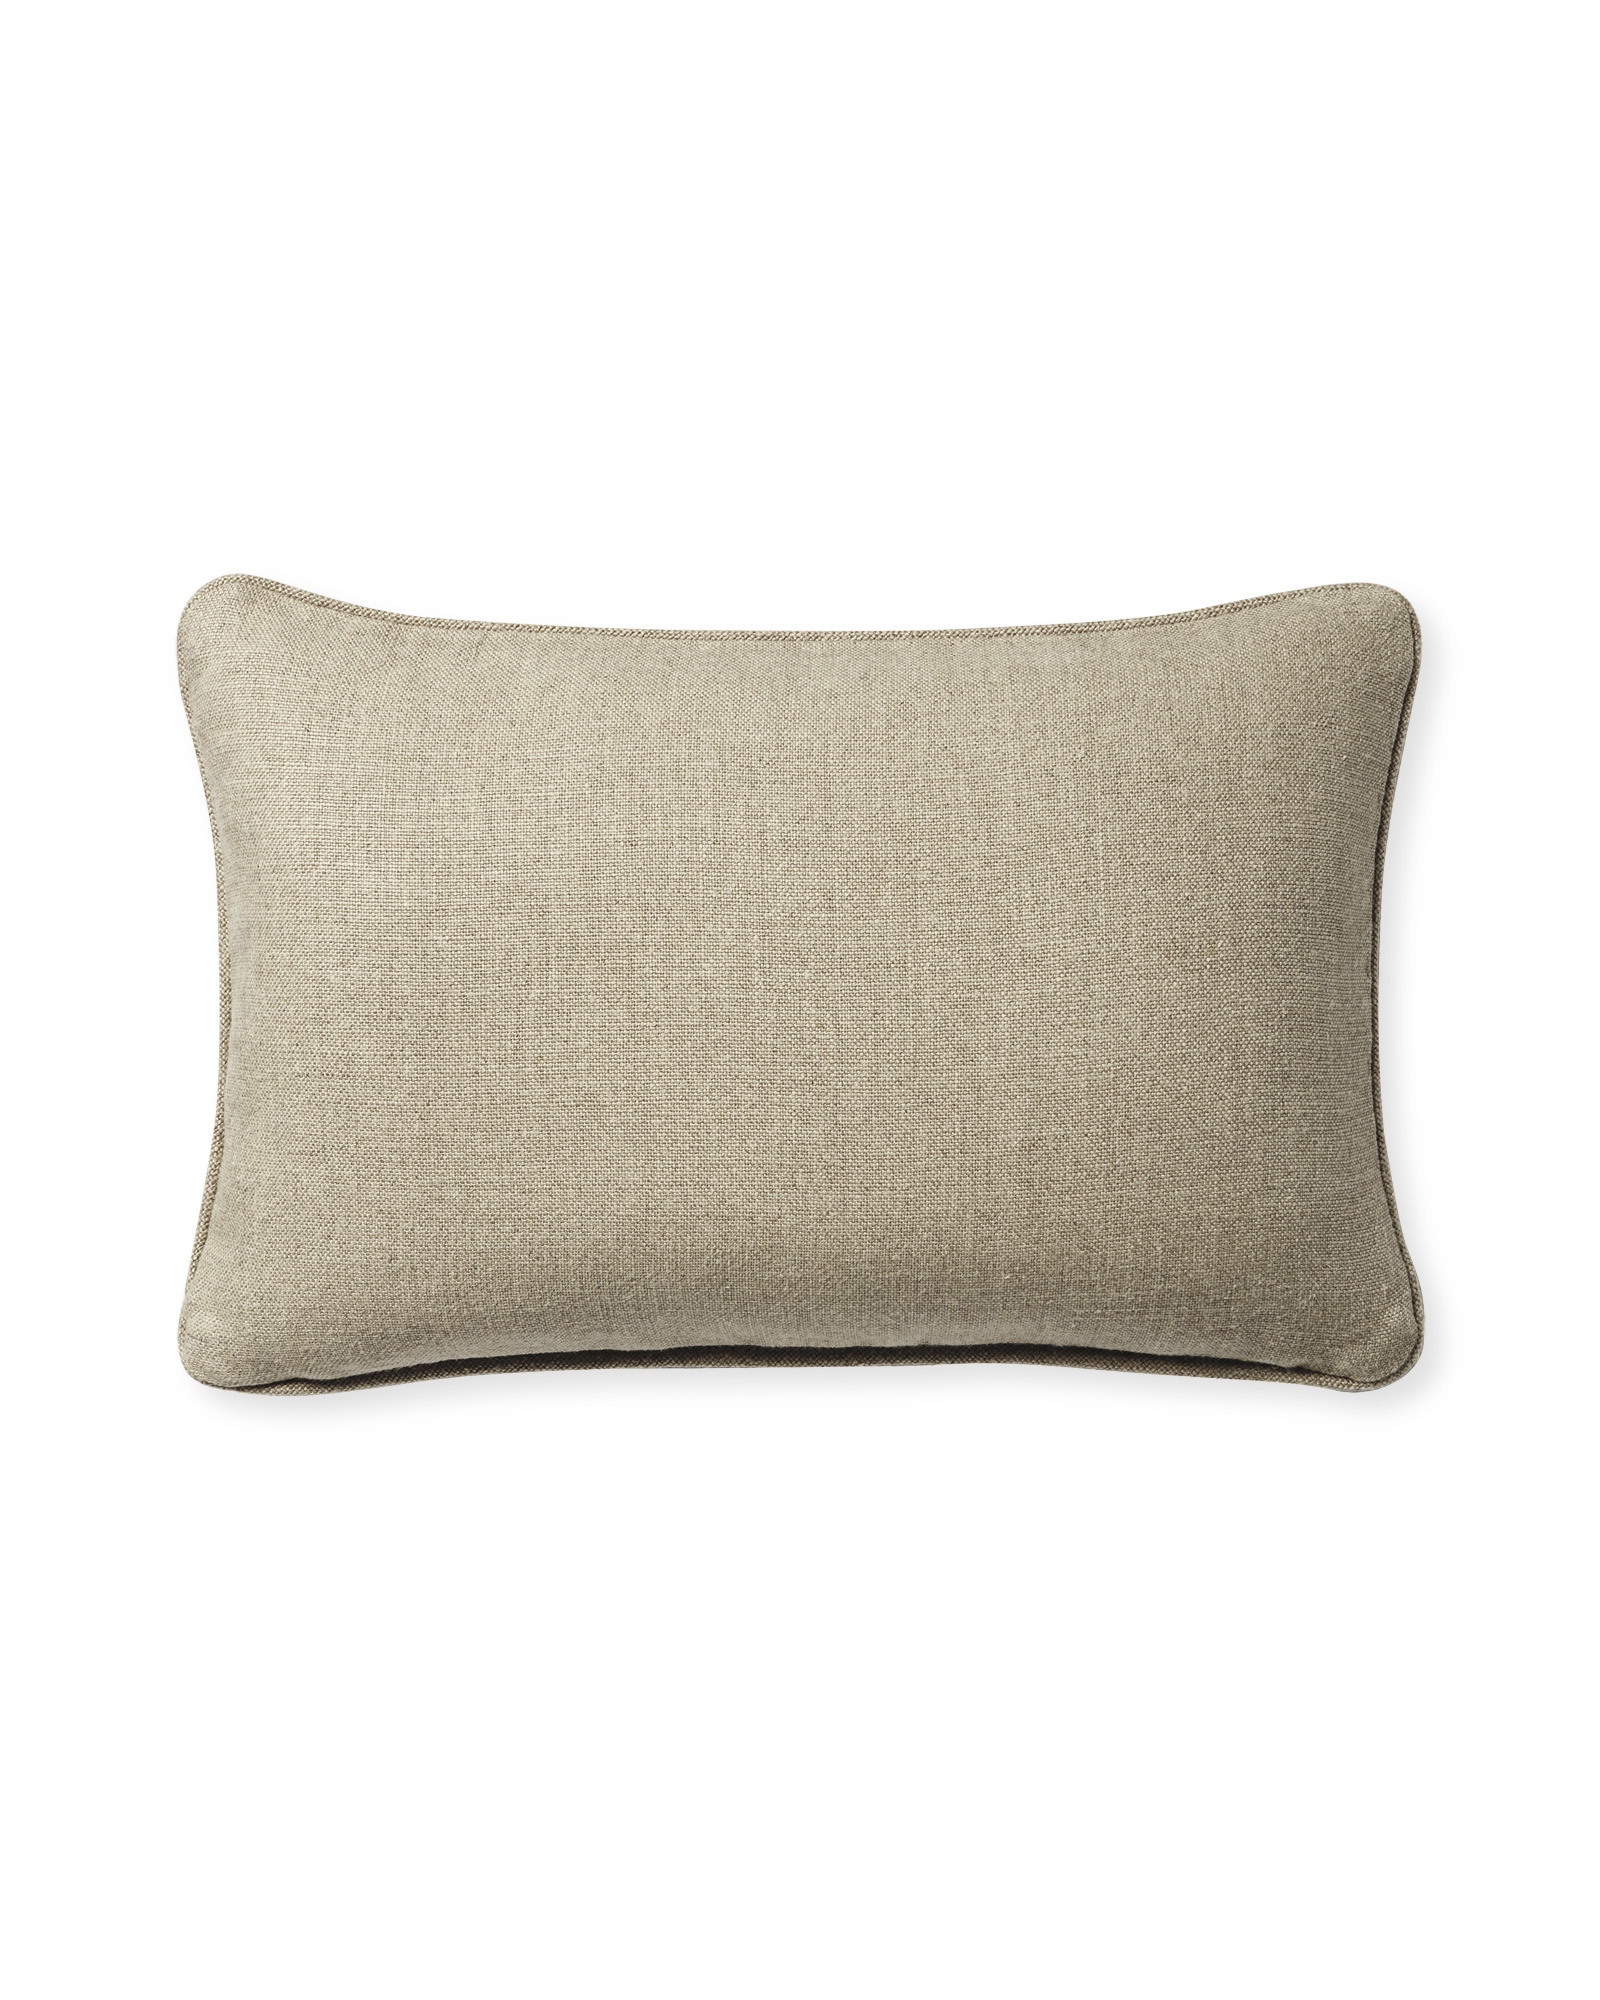 Leather 12" x 18" Pillow Cover - Pewter - Insert sold separately - Image 1